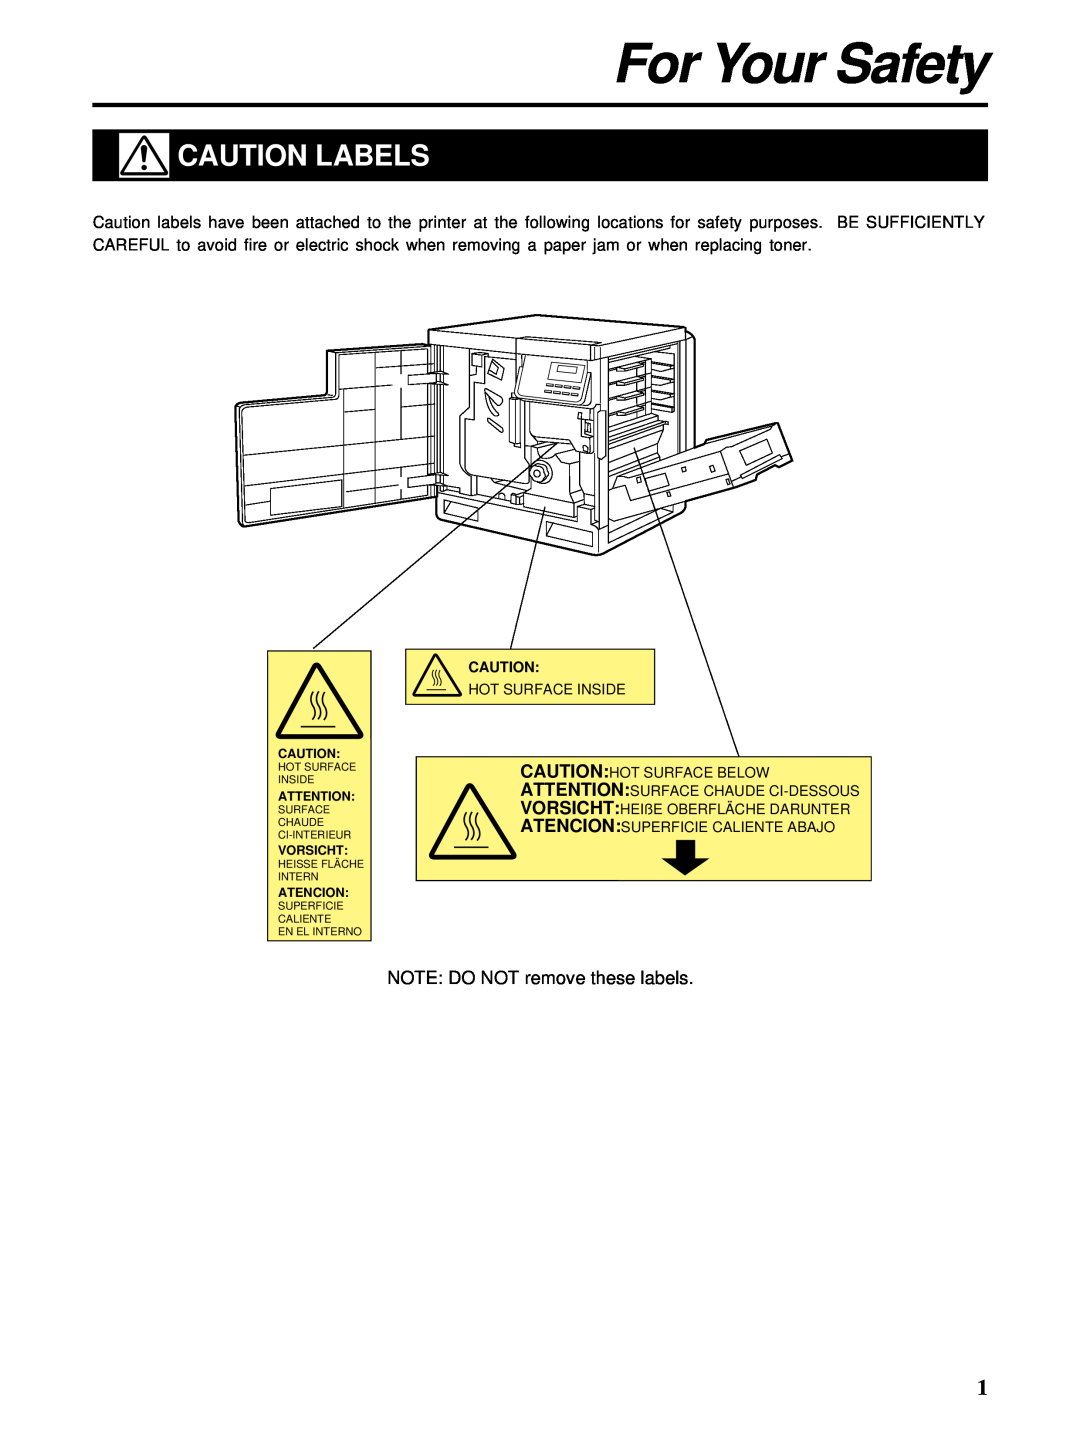 HP Ci 1100 manual For Your Safety, Caution Labels, NOTE DO NOT remove these labels 